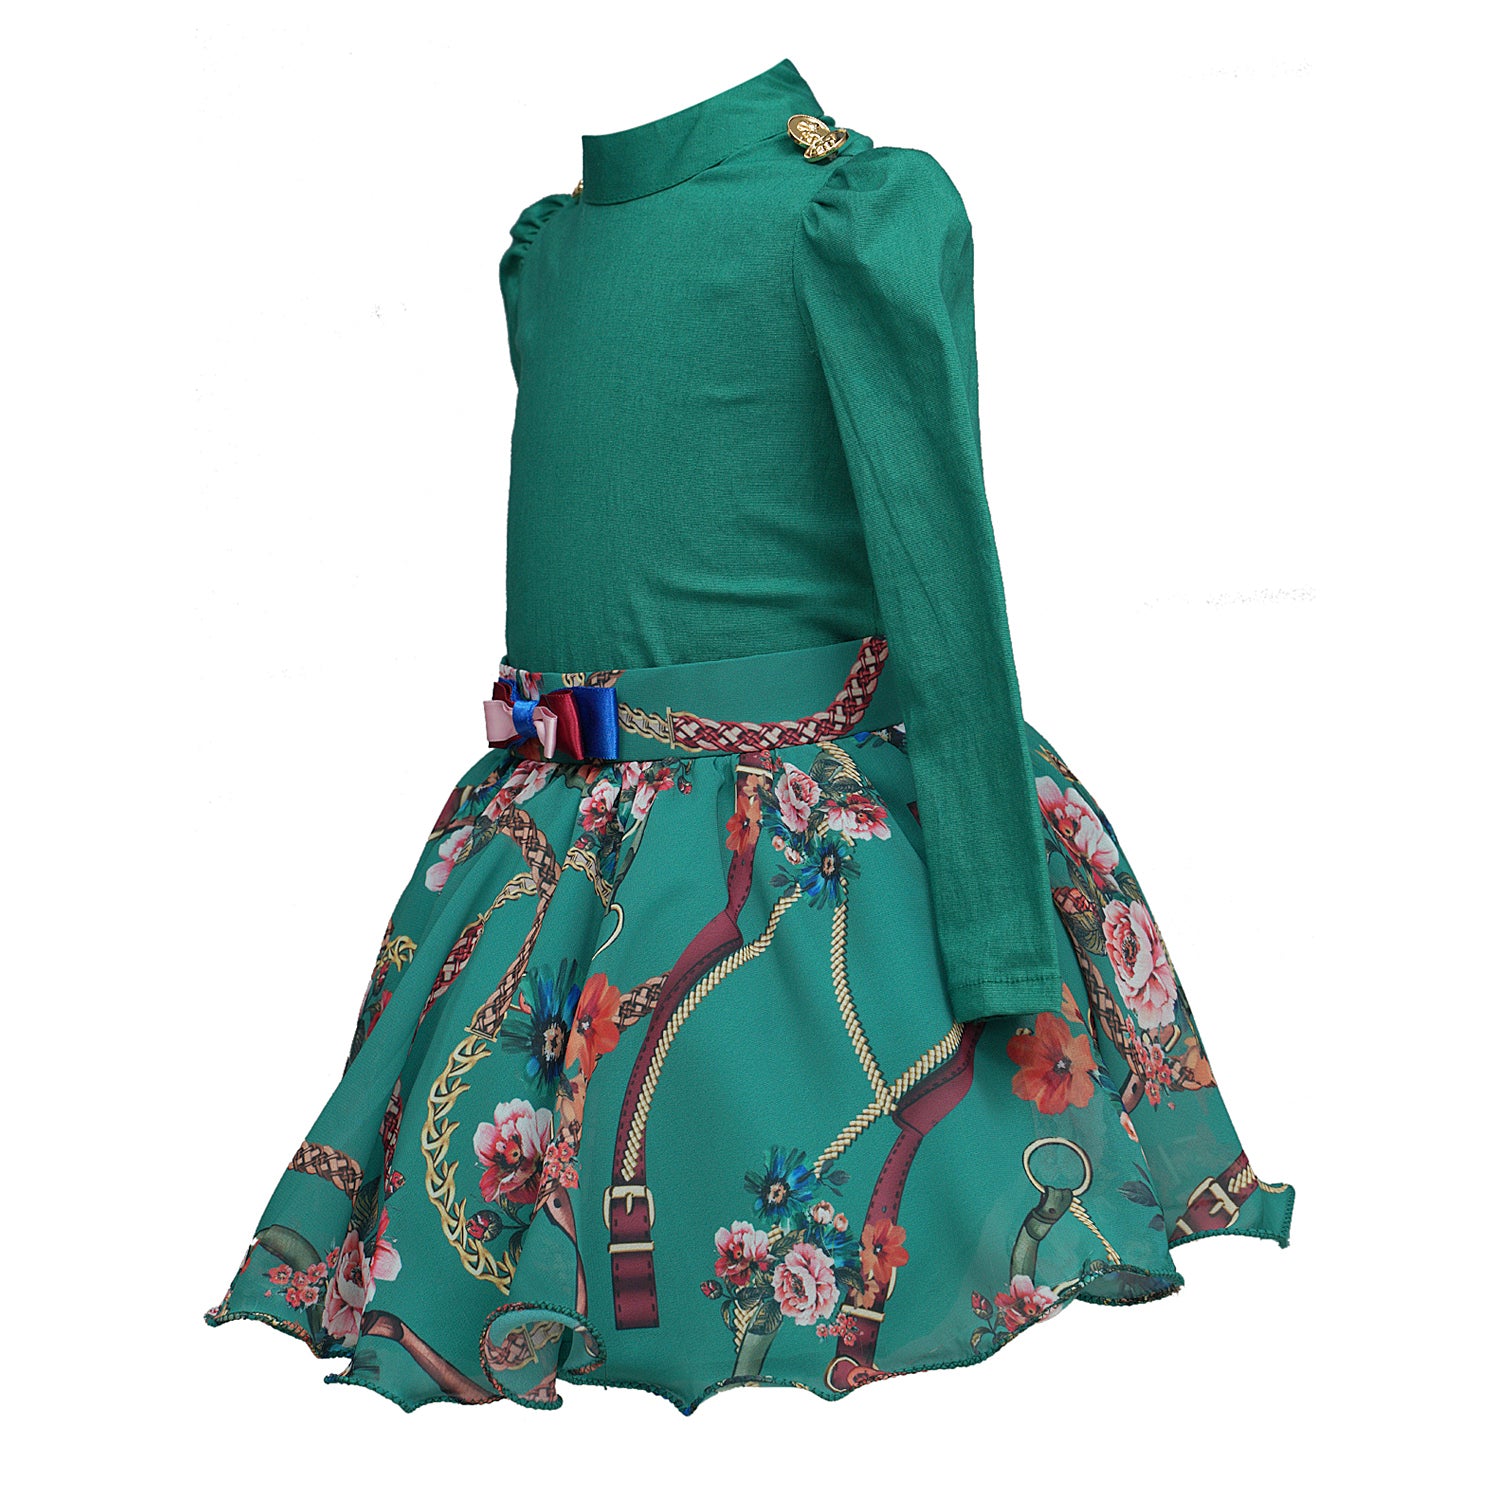 Green Dragonfly Co-ord Skirt Set - The Pony & Peony Co.